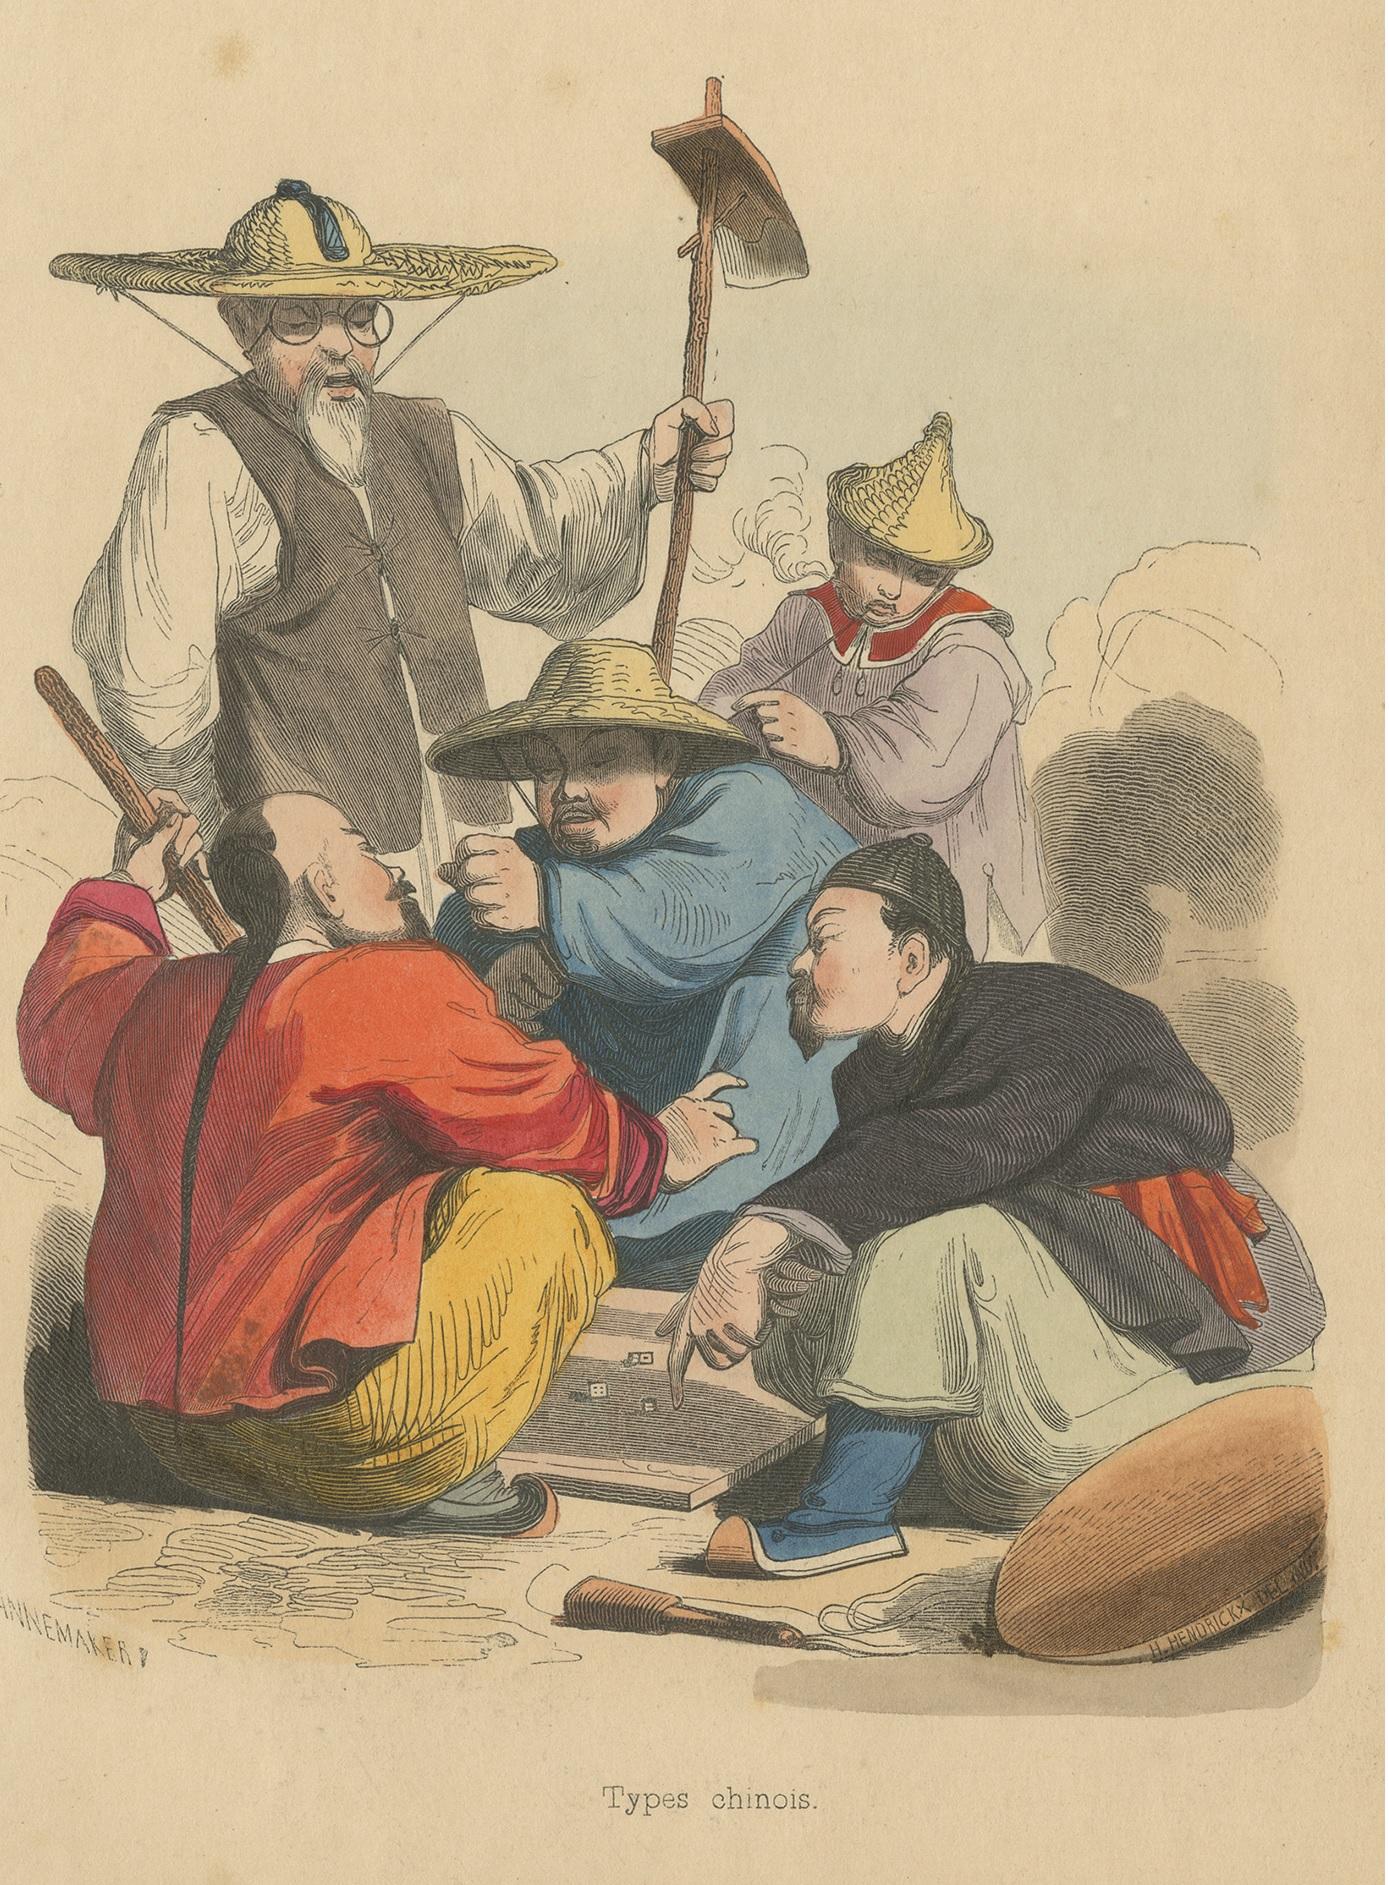 Antique costume print titled 'Types Chinois'. Original antique print of Chinese men playing a game of dice. This print originates from 'Moeurs, usages et costumes de tous les peuples du monde' by Auguste Wahlen.